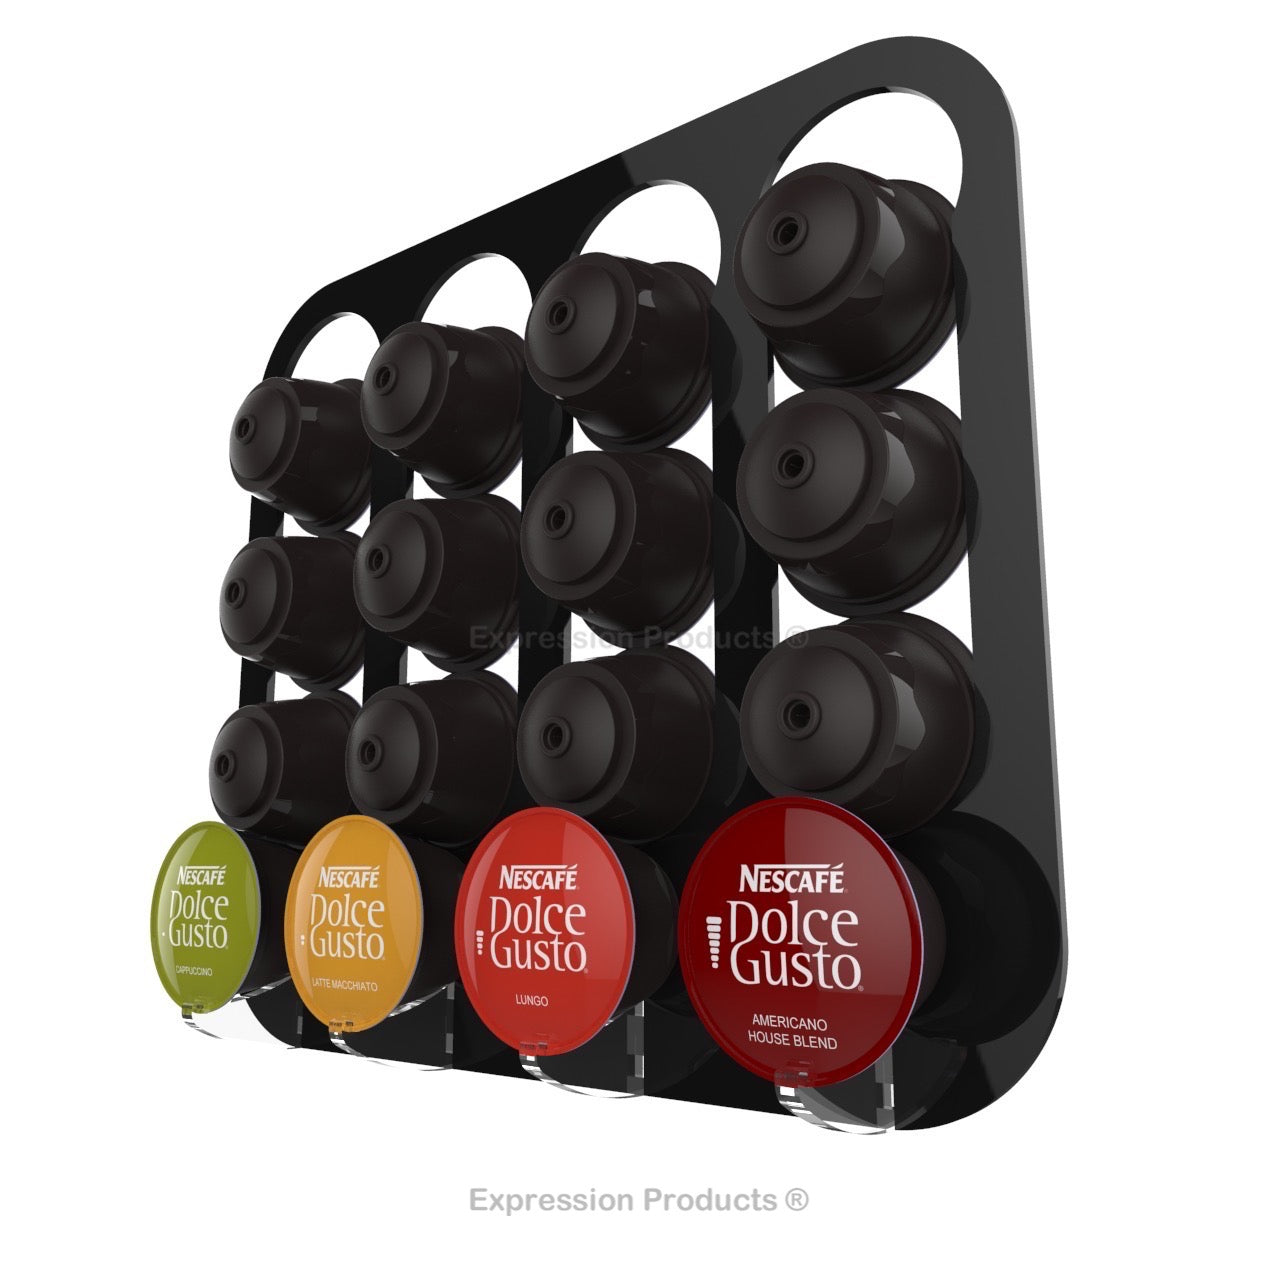 Dolce gusto coffee pod holder, wall mounted, half height.  Shown in black holding 16 pods